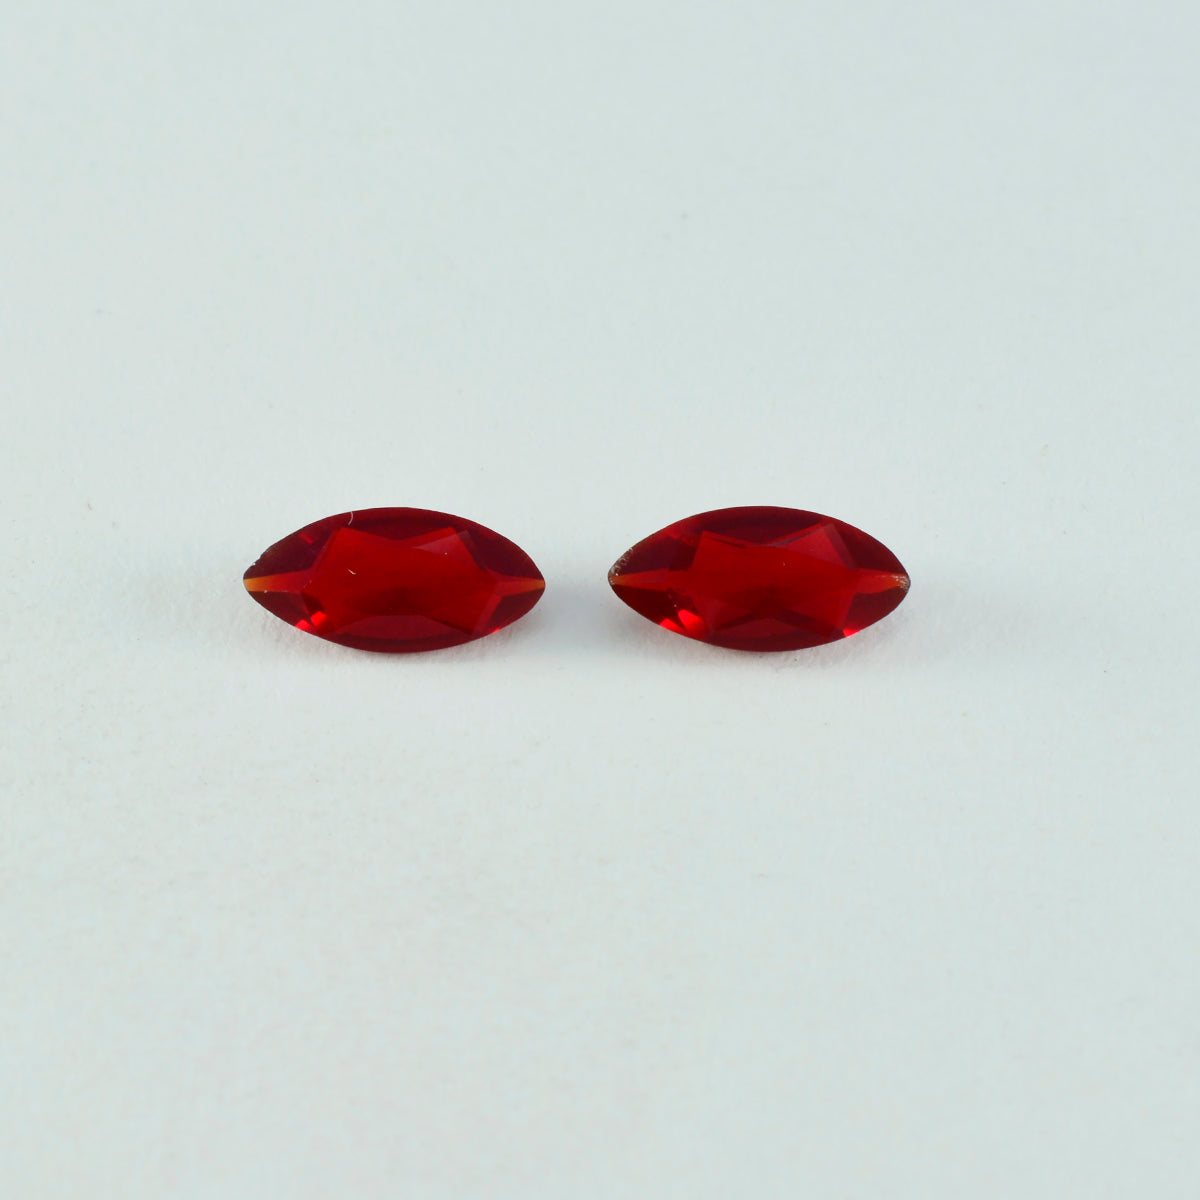 Riyogems 1PC Red Ruby CZ Faceted 3x6 mm Marquise Shape A1 Quality Loose Stone